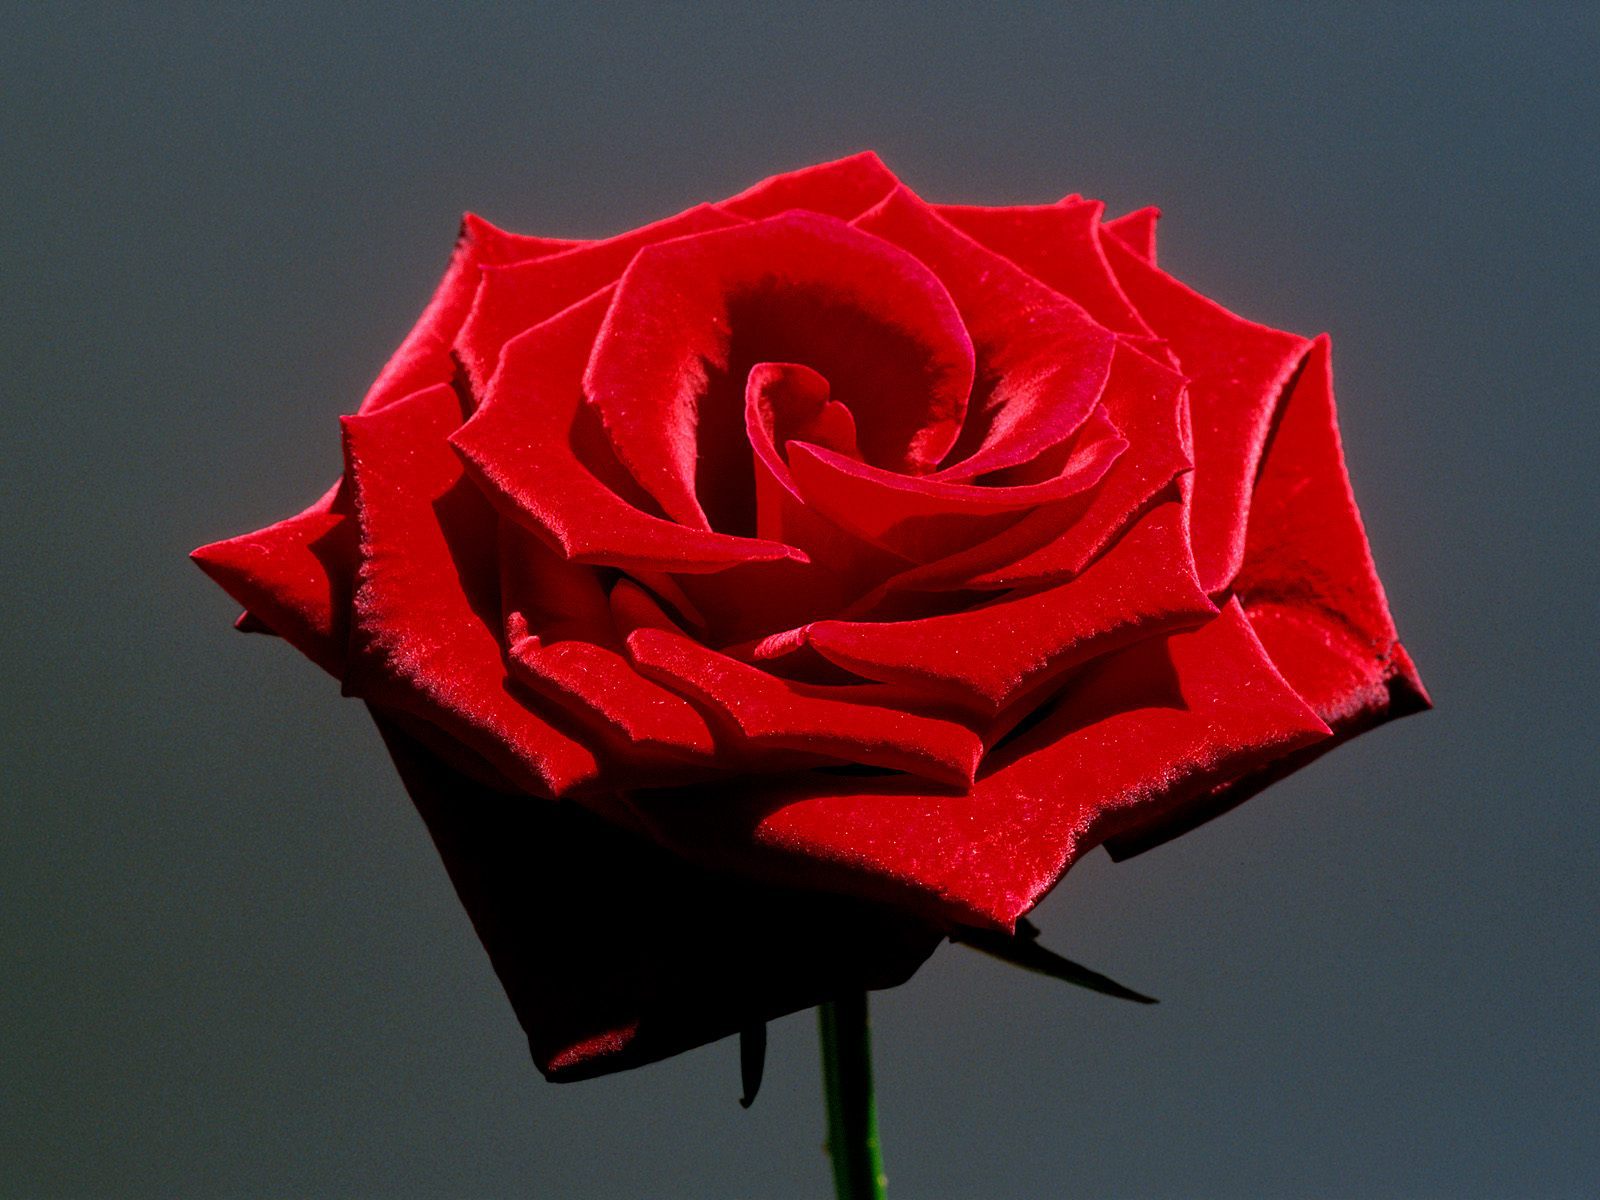 25+ Lovely and Beautiful Red Rose Pictures For Valentines ...